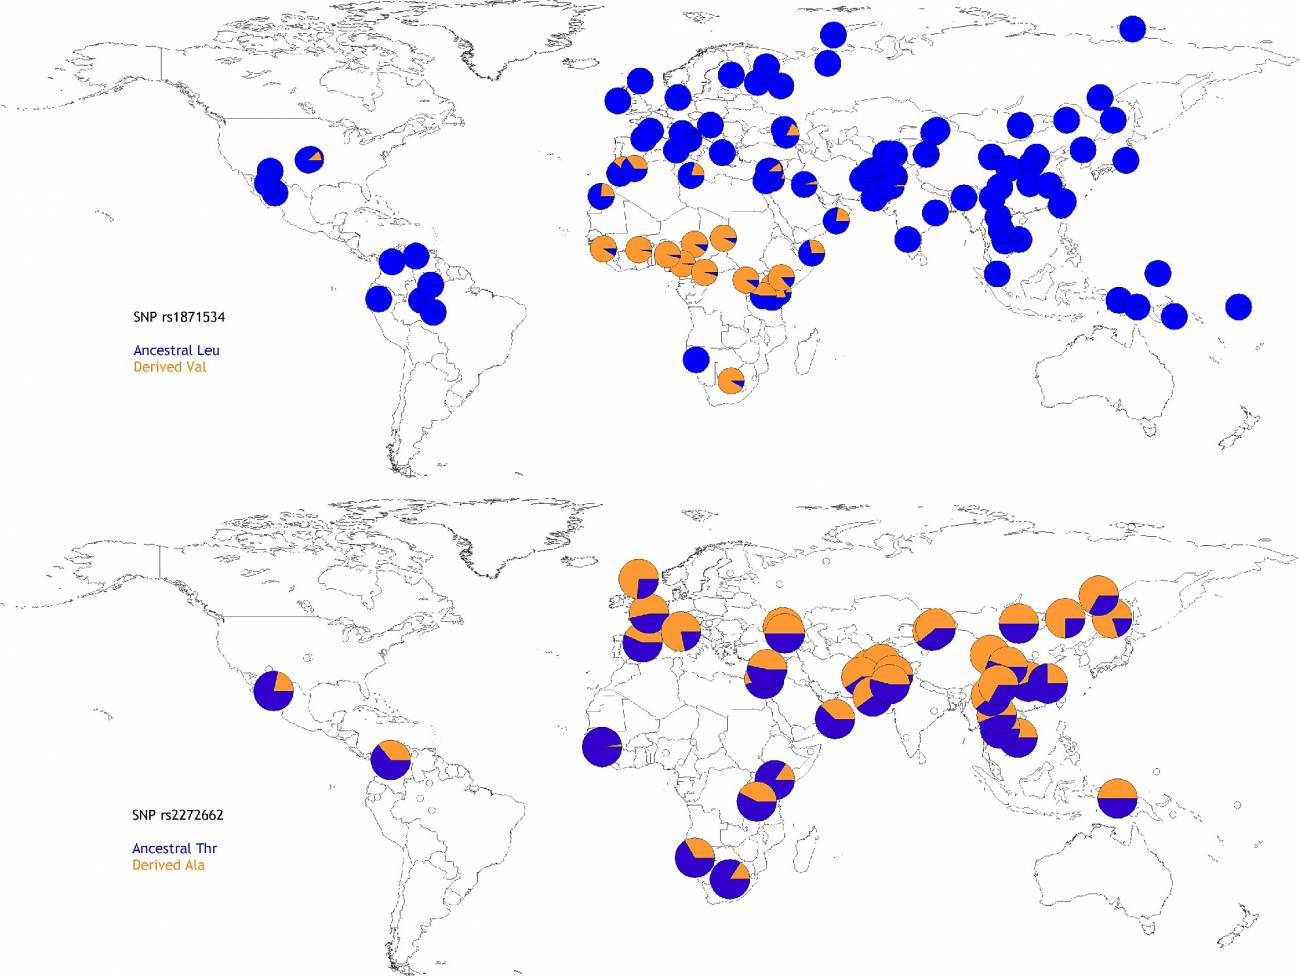 Worldwide allele frequencies for the Leu372Val (rs1871534, top) Thr357Ala (rs2272662, bottom) polymorphisms 